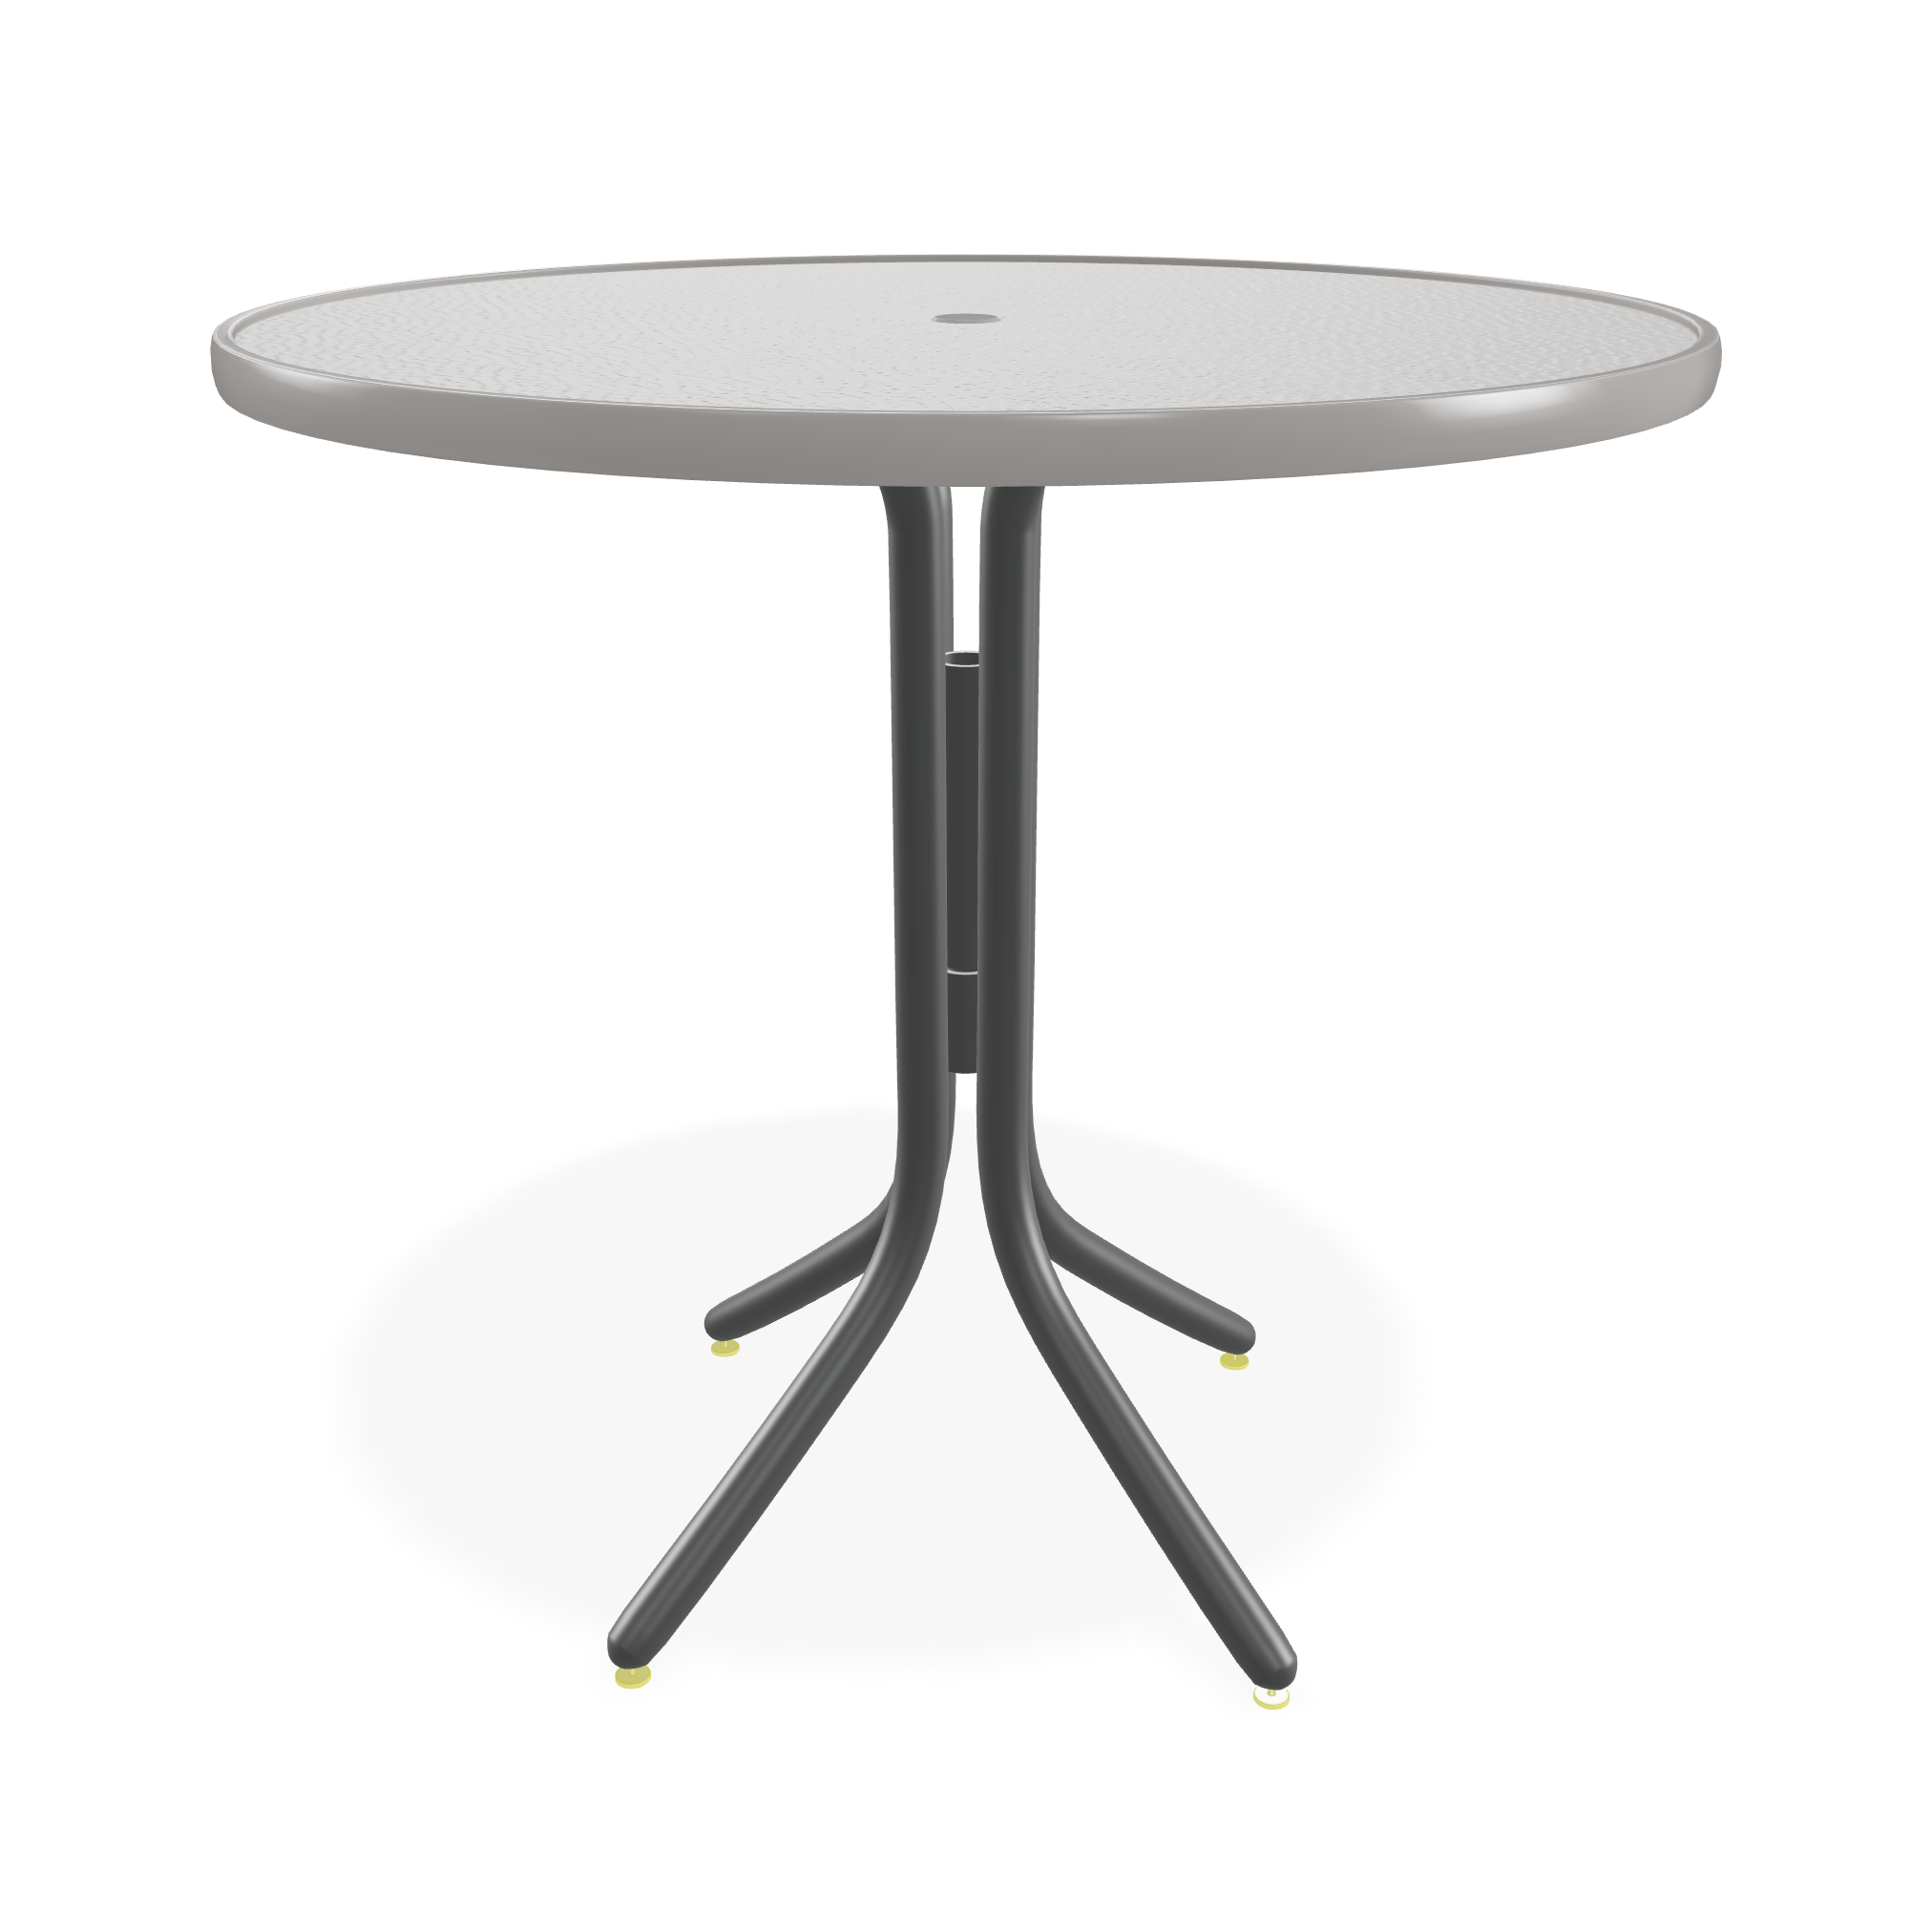 42" Round Value Hammered MGP Top Tables By Telescope